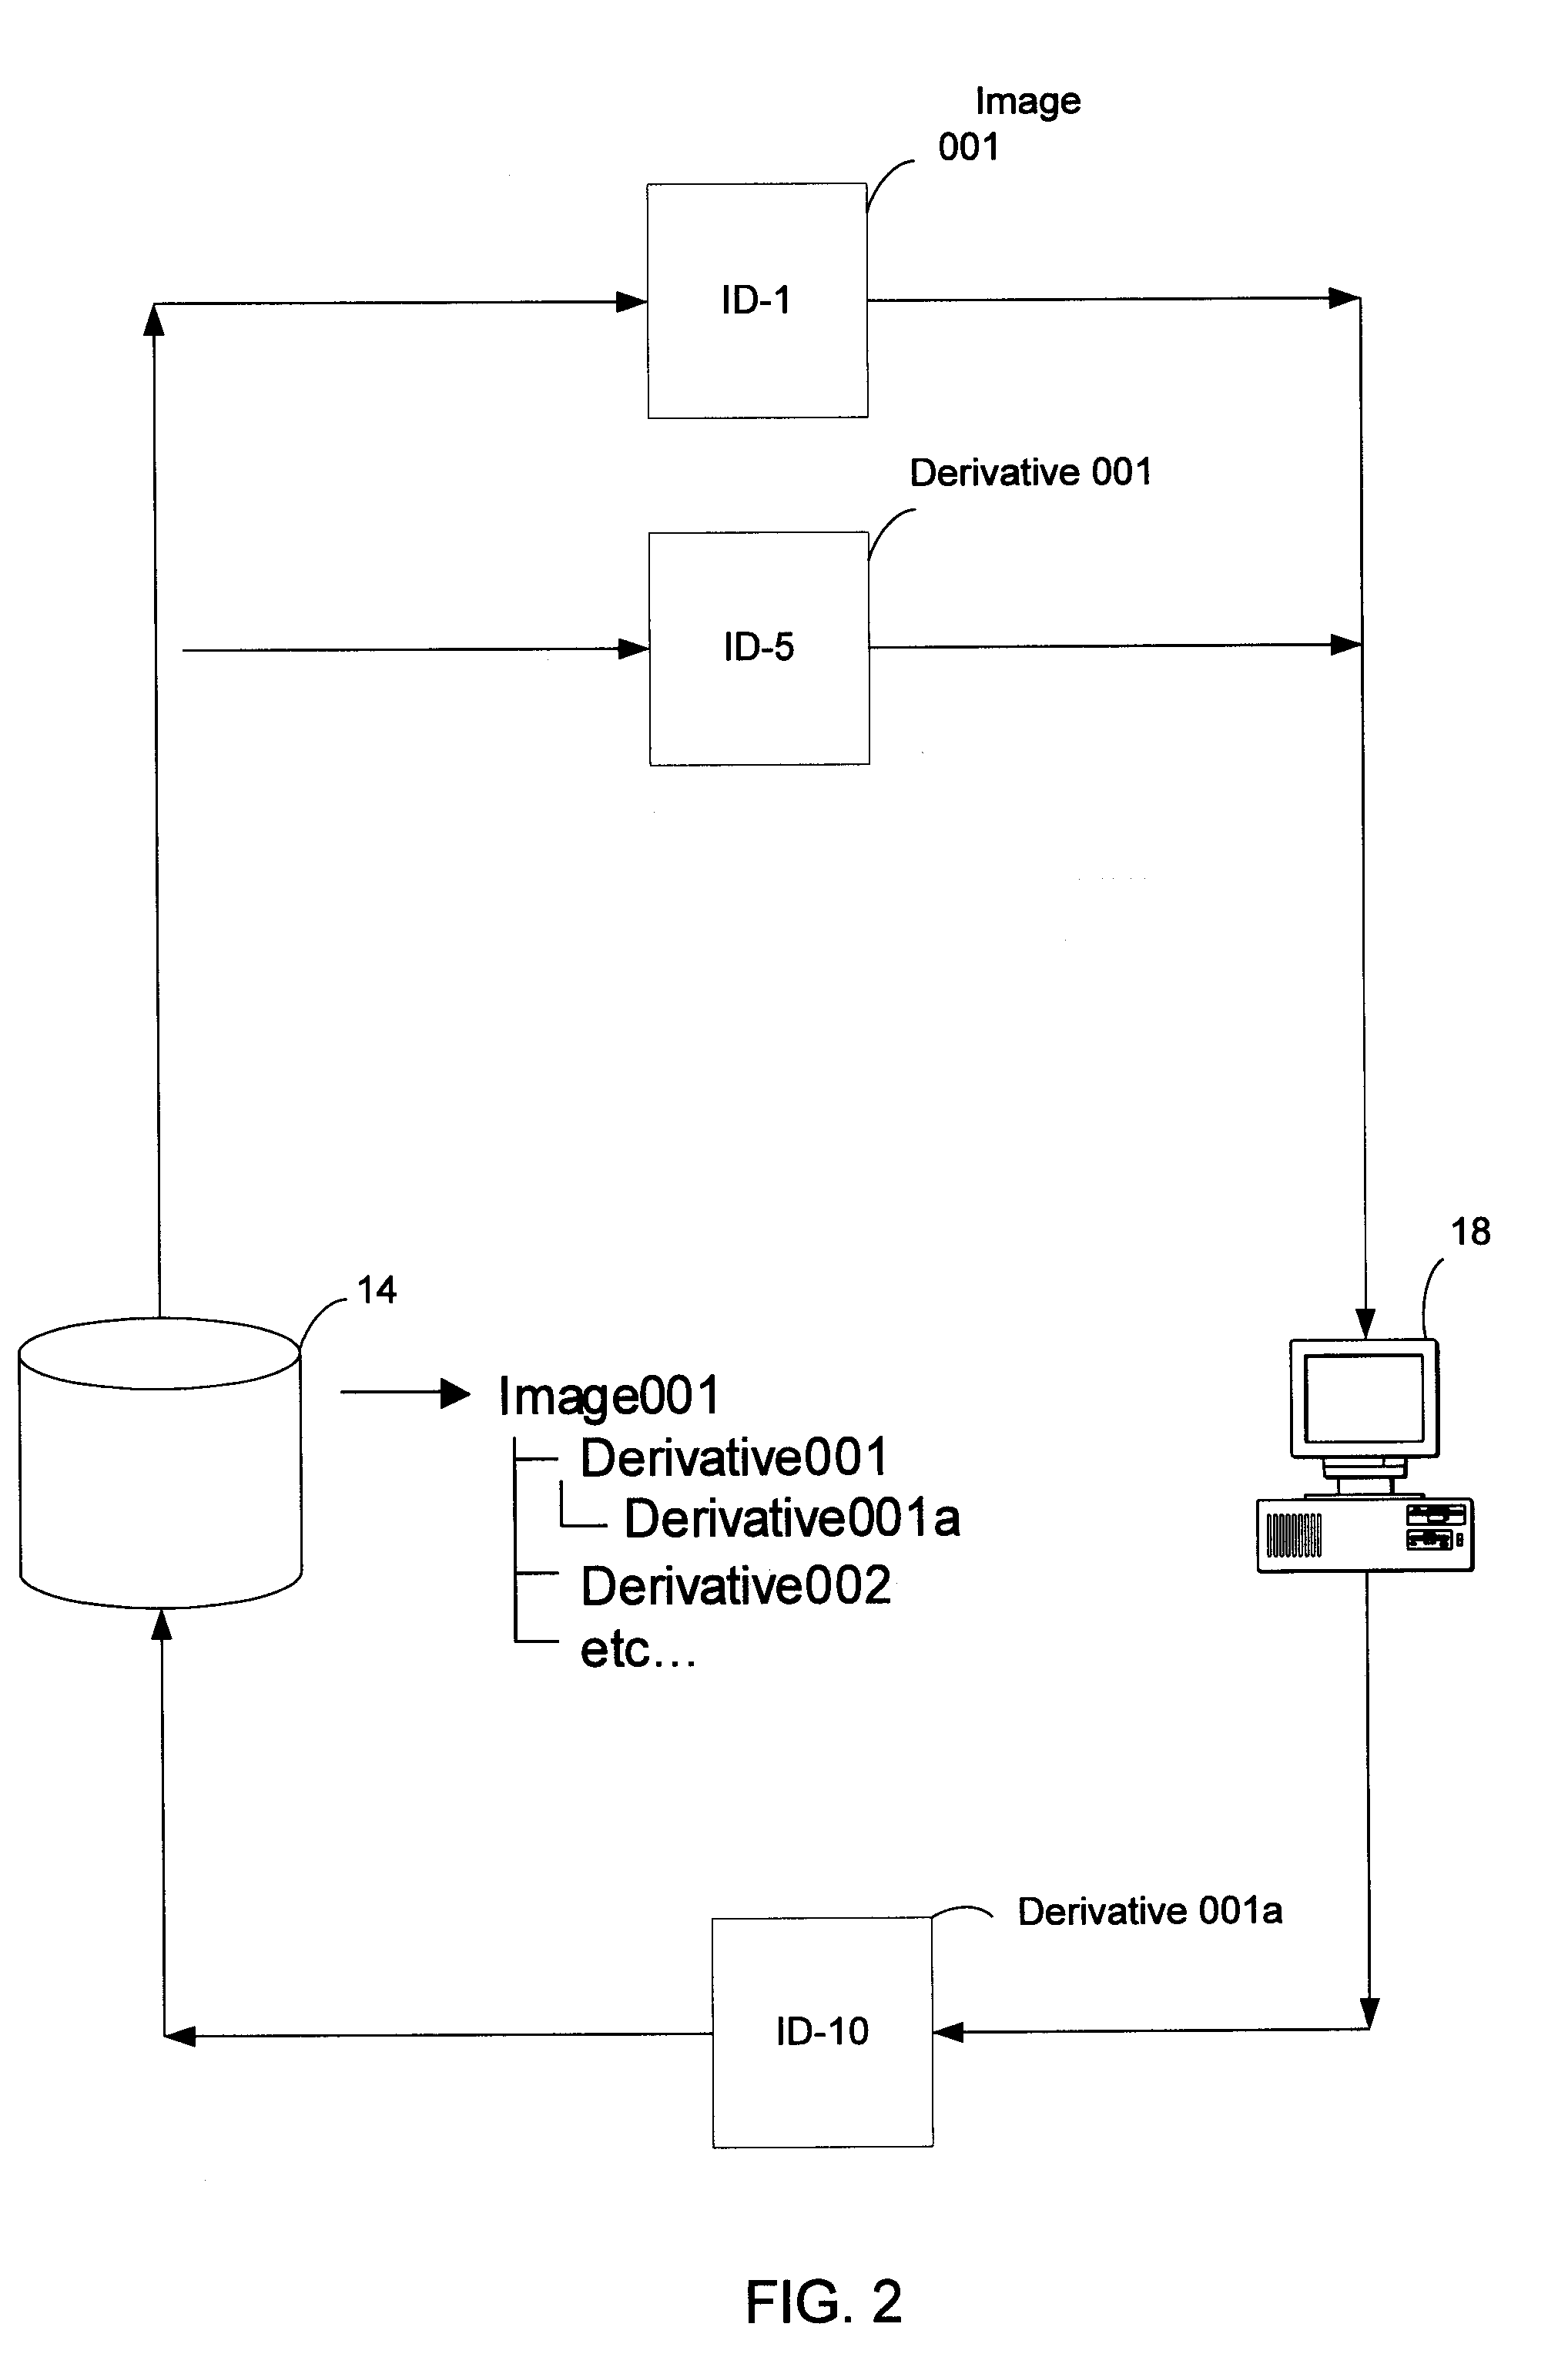 Image management system and methods using digital watermarks